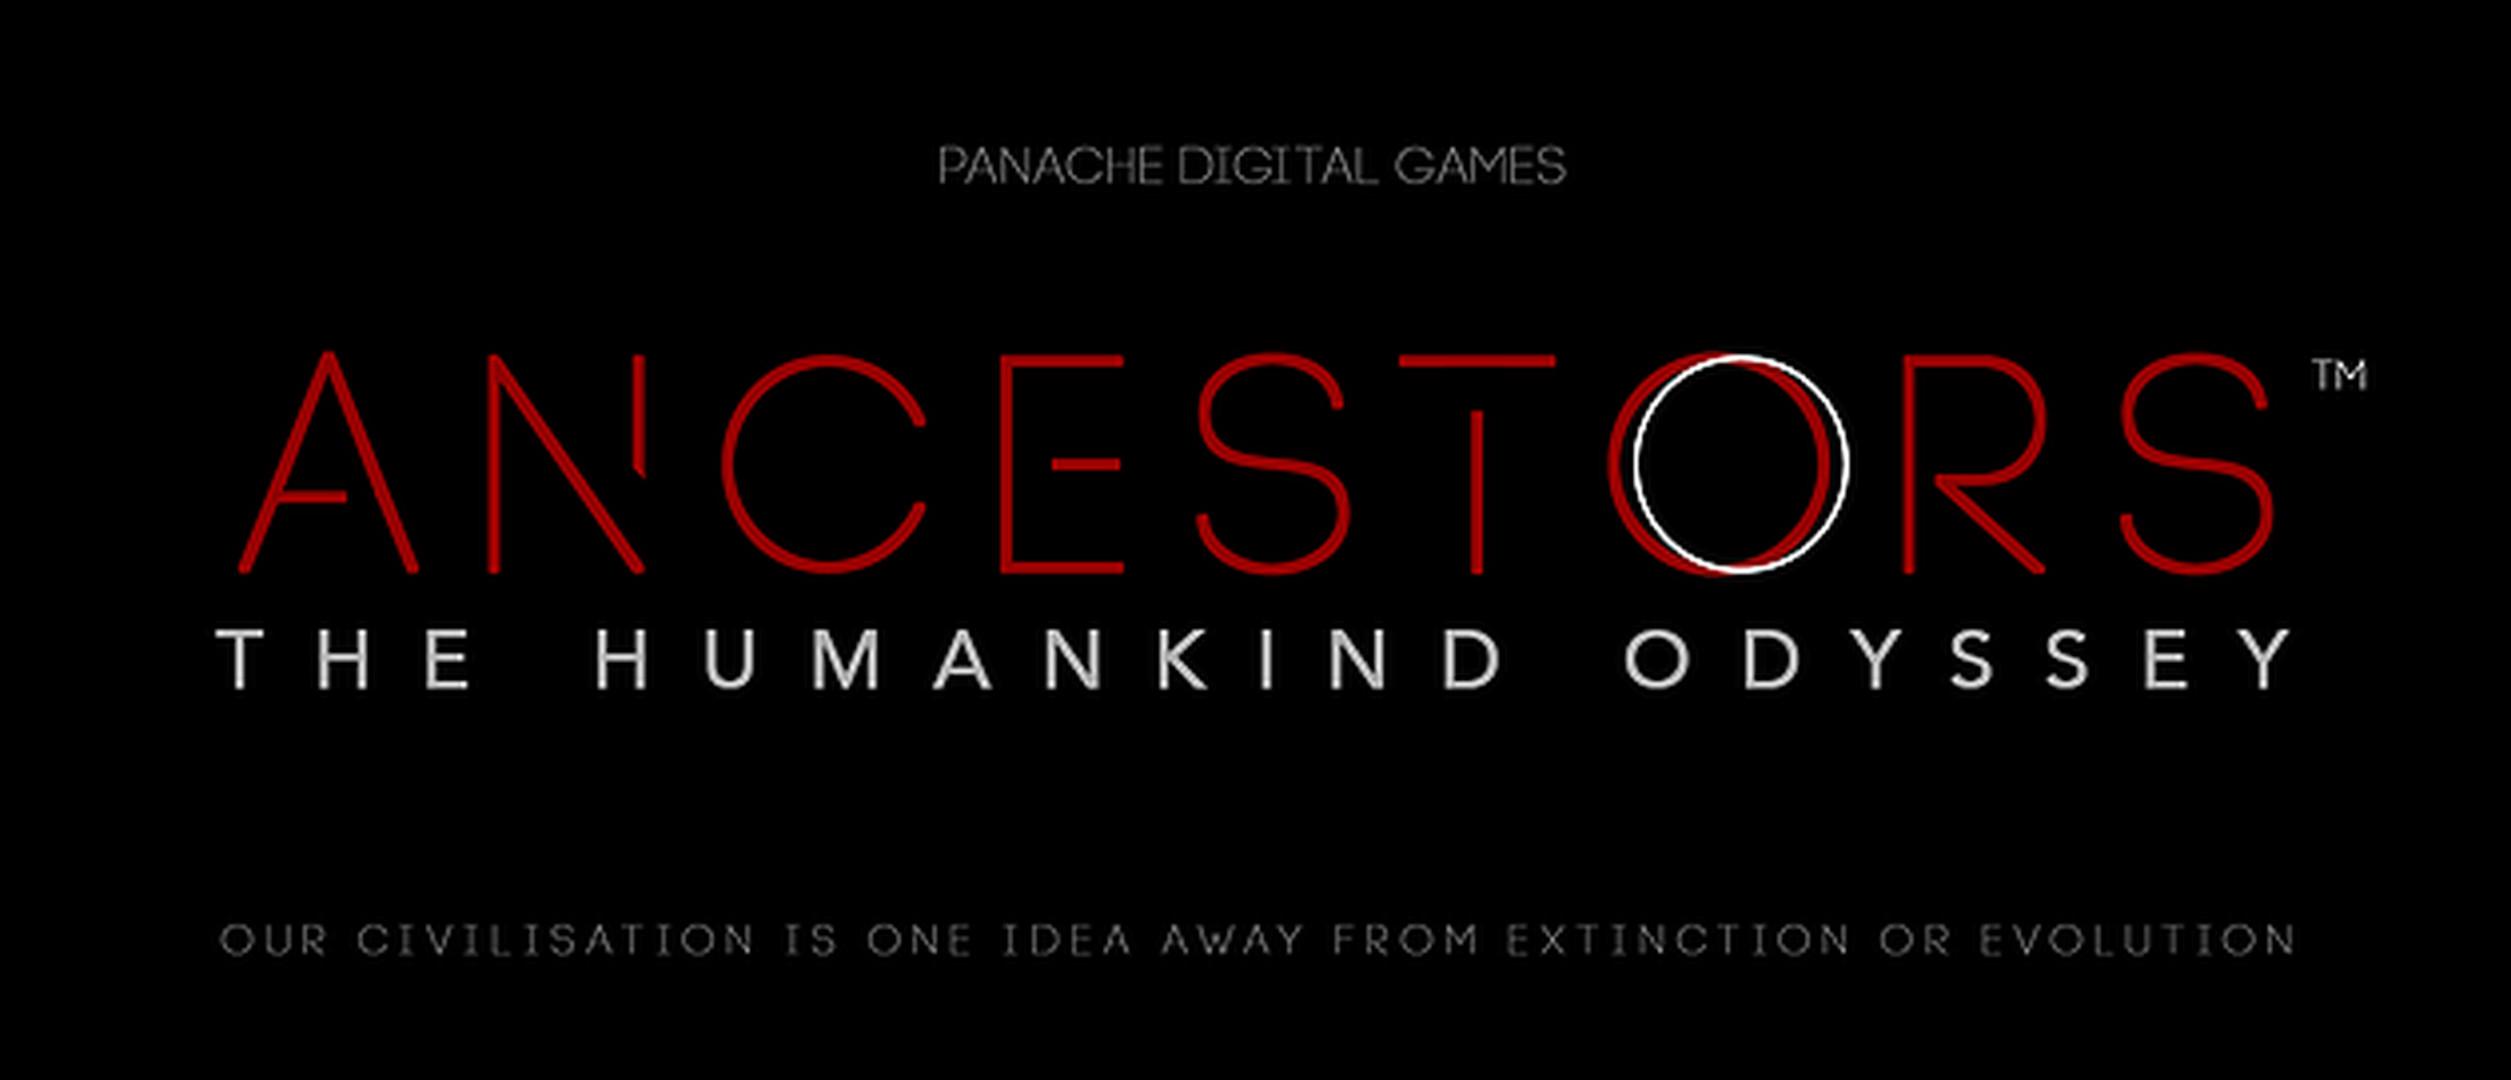 Ancestors: The Humankind Odyssey is the next game from Assassin's